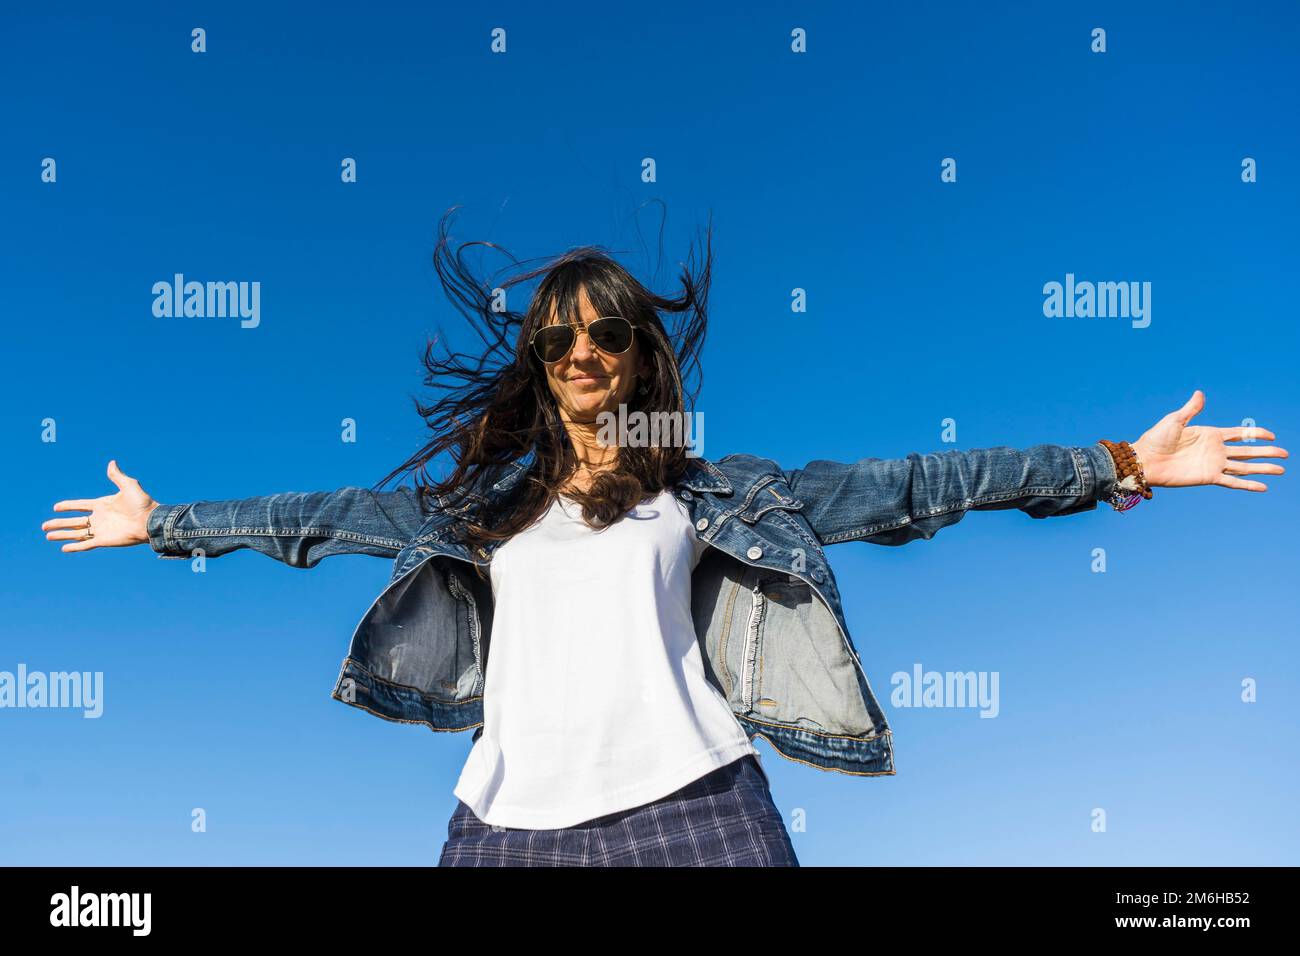 Low angle view of a similing woman with her arms opened outdoors. Blue sky background Stock Photo